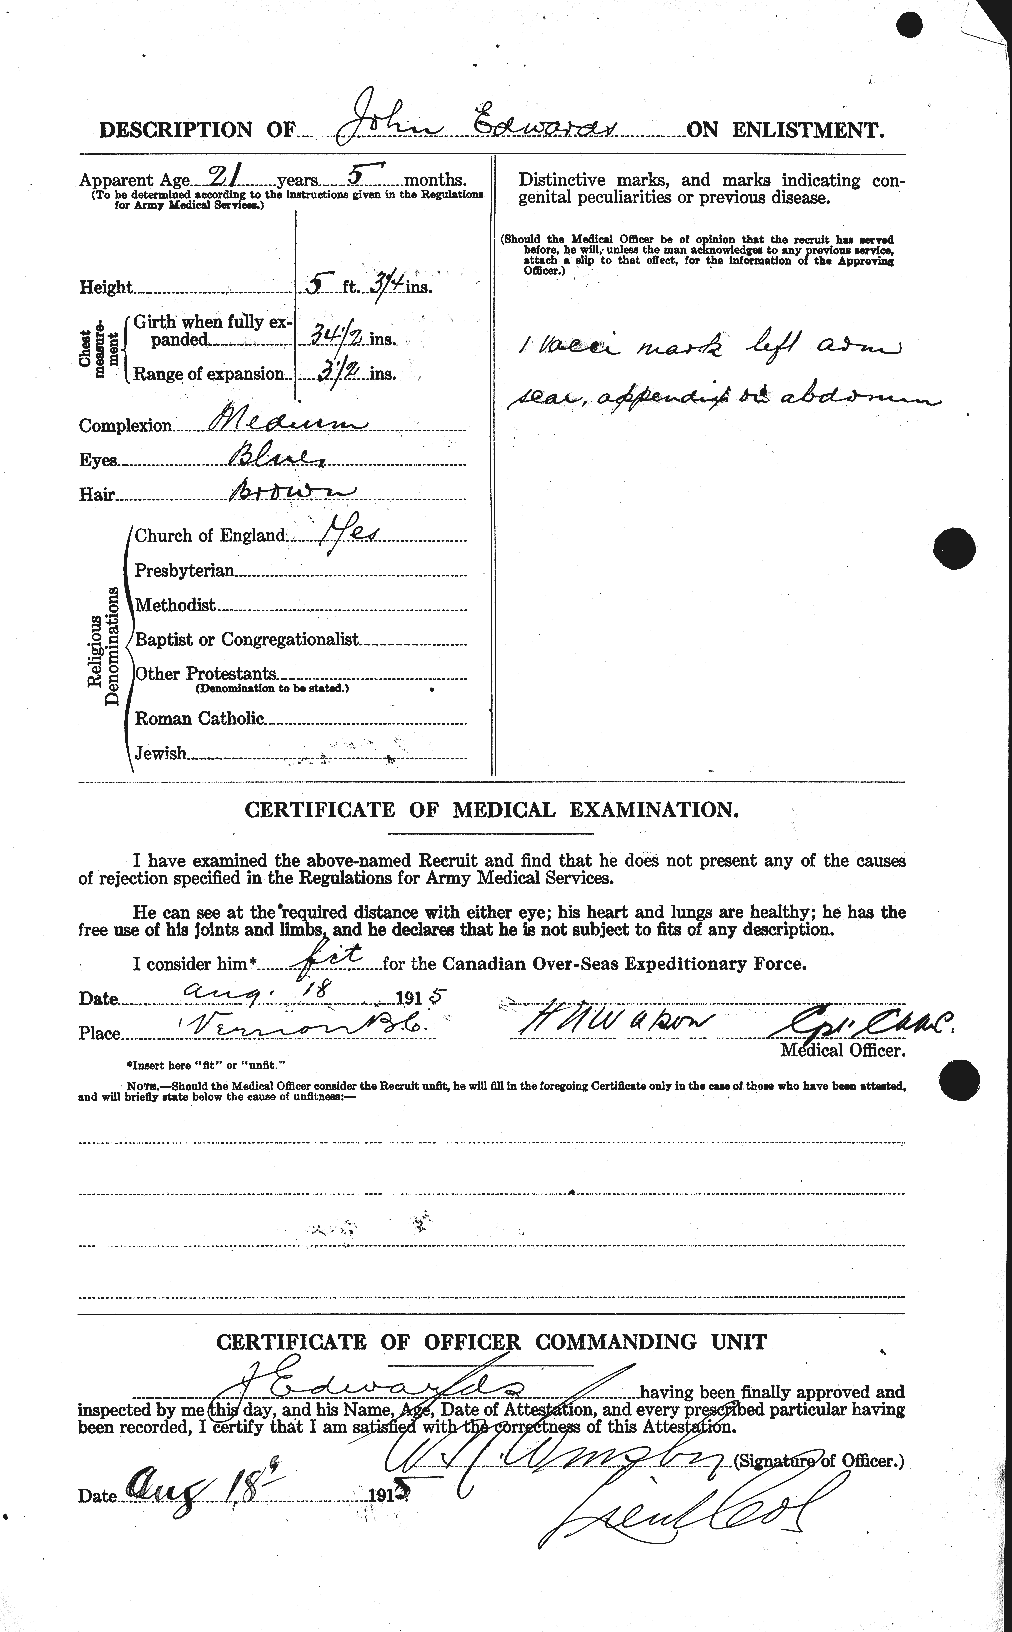 Personnel Records of the First World War - CEF 309833b